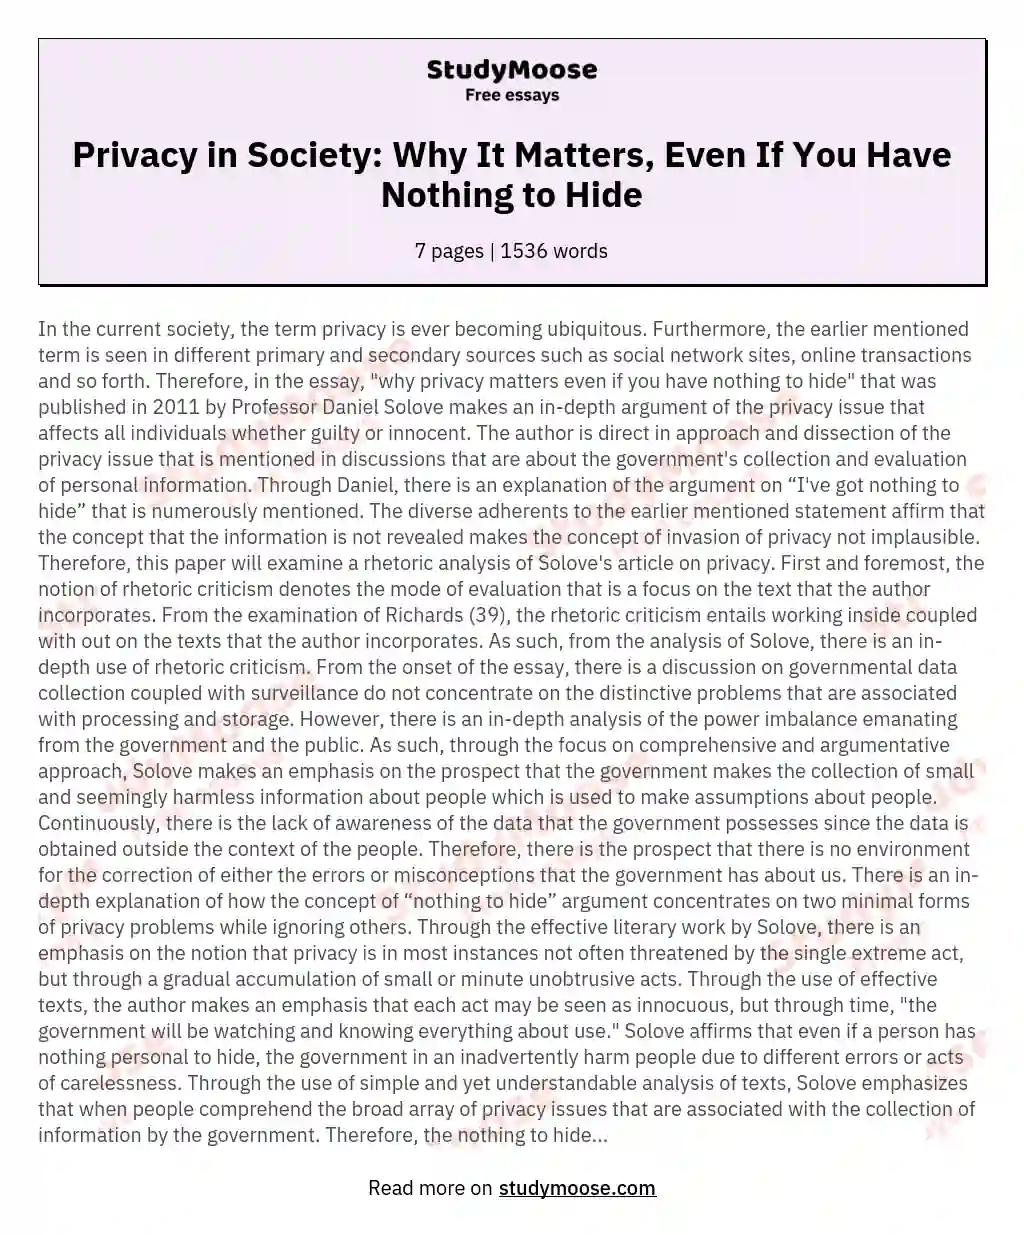 The Issue of Privacy in Our Society: Why Privacy Matters Even if You Have Nothing to Hide by Daniel Solove